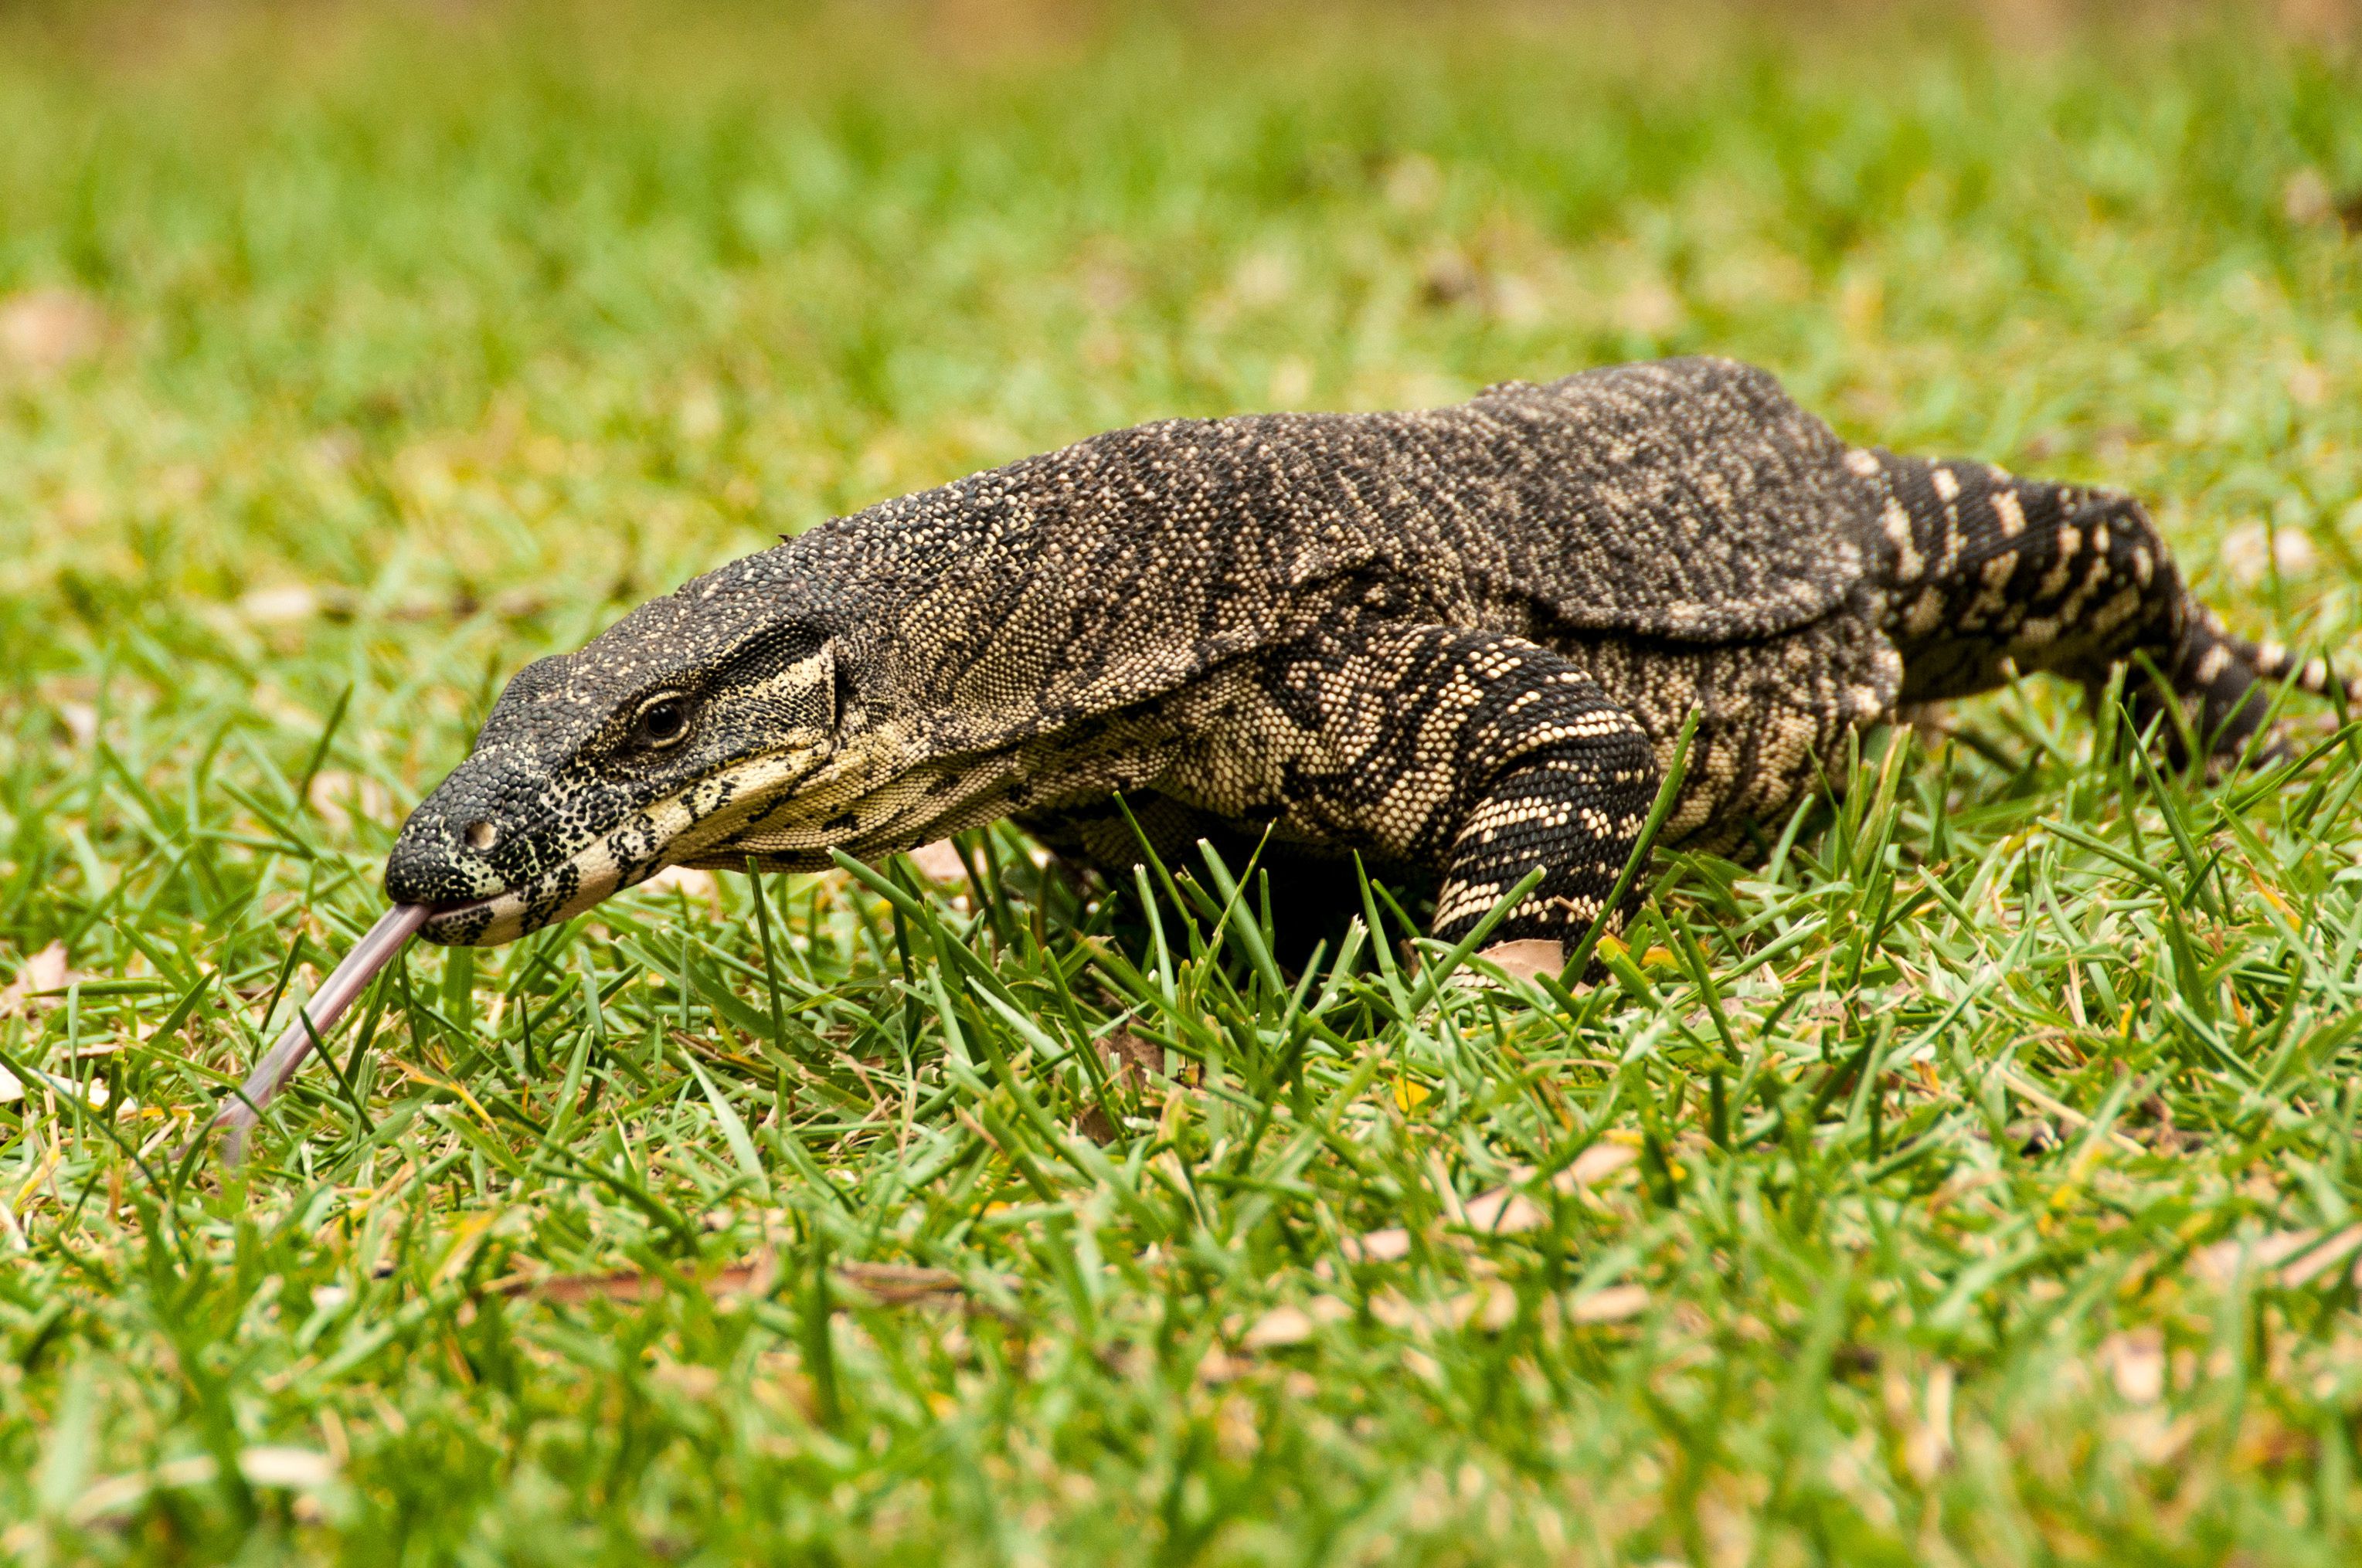 Monitor lizard walking in grass with tongue sticking out.